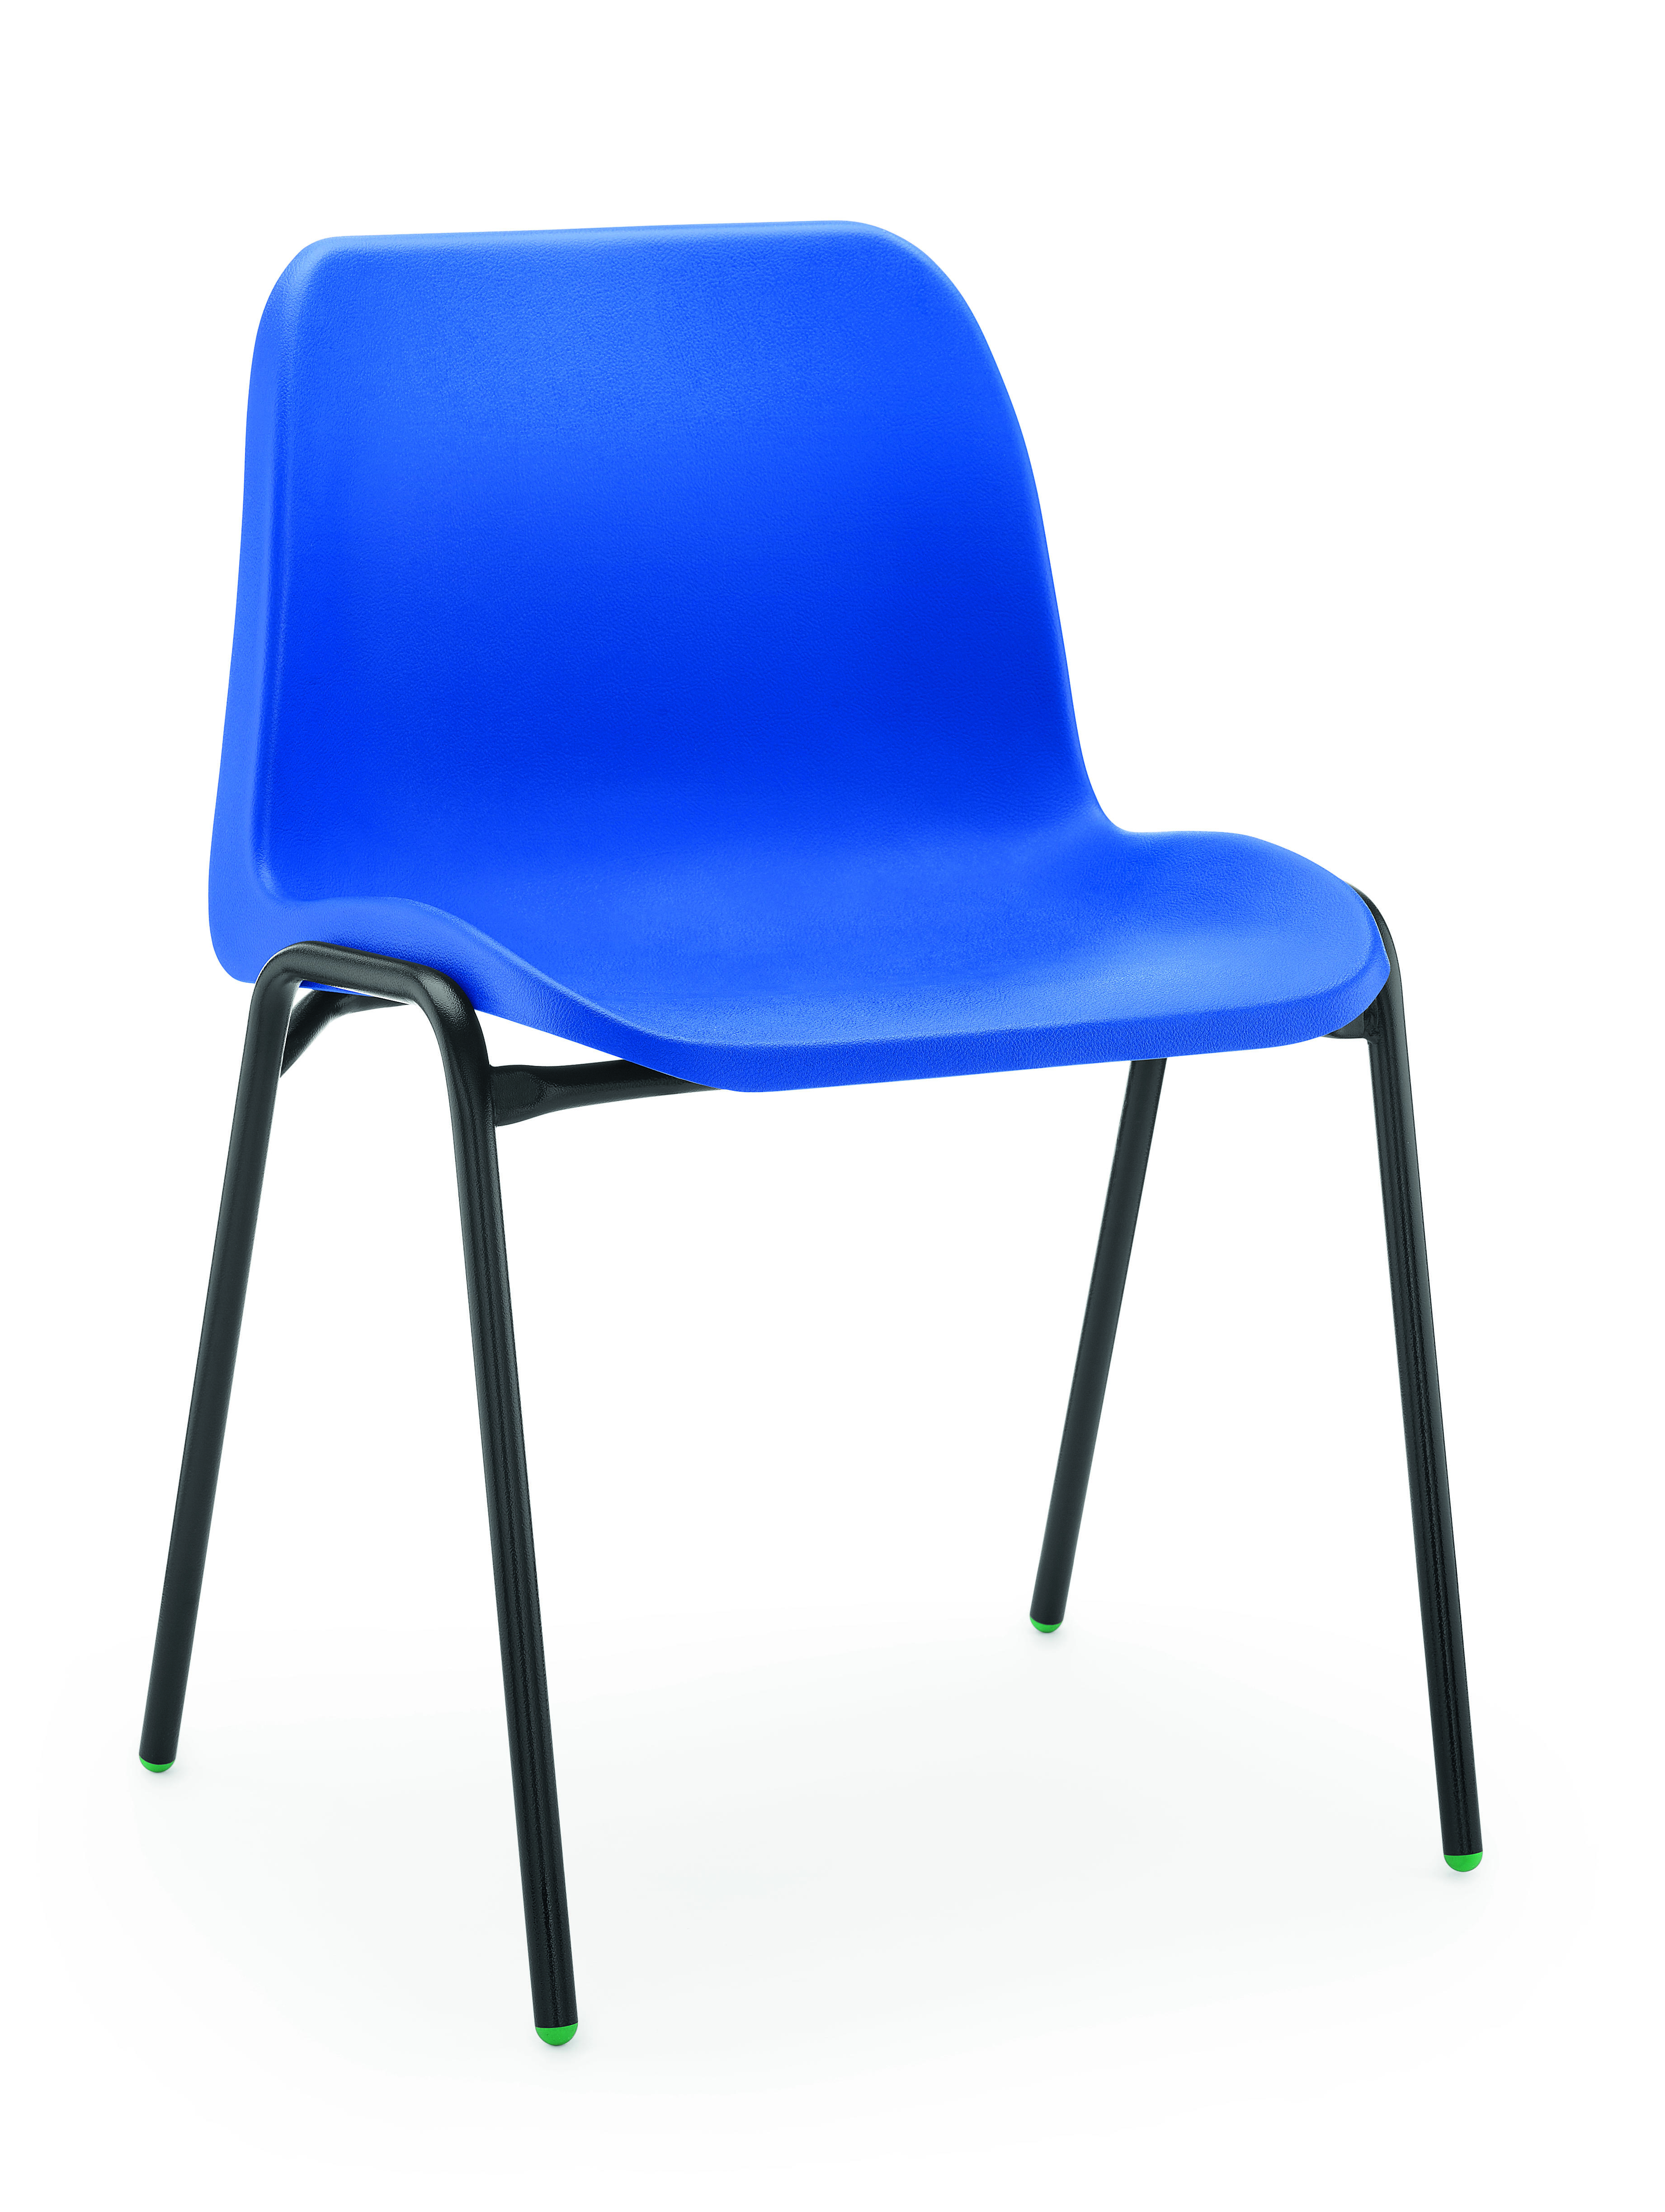 Classmates Chairs Blue - 11-14 years